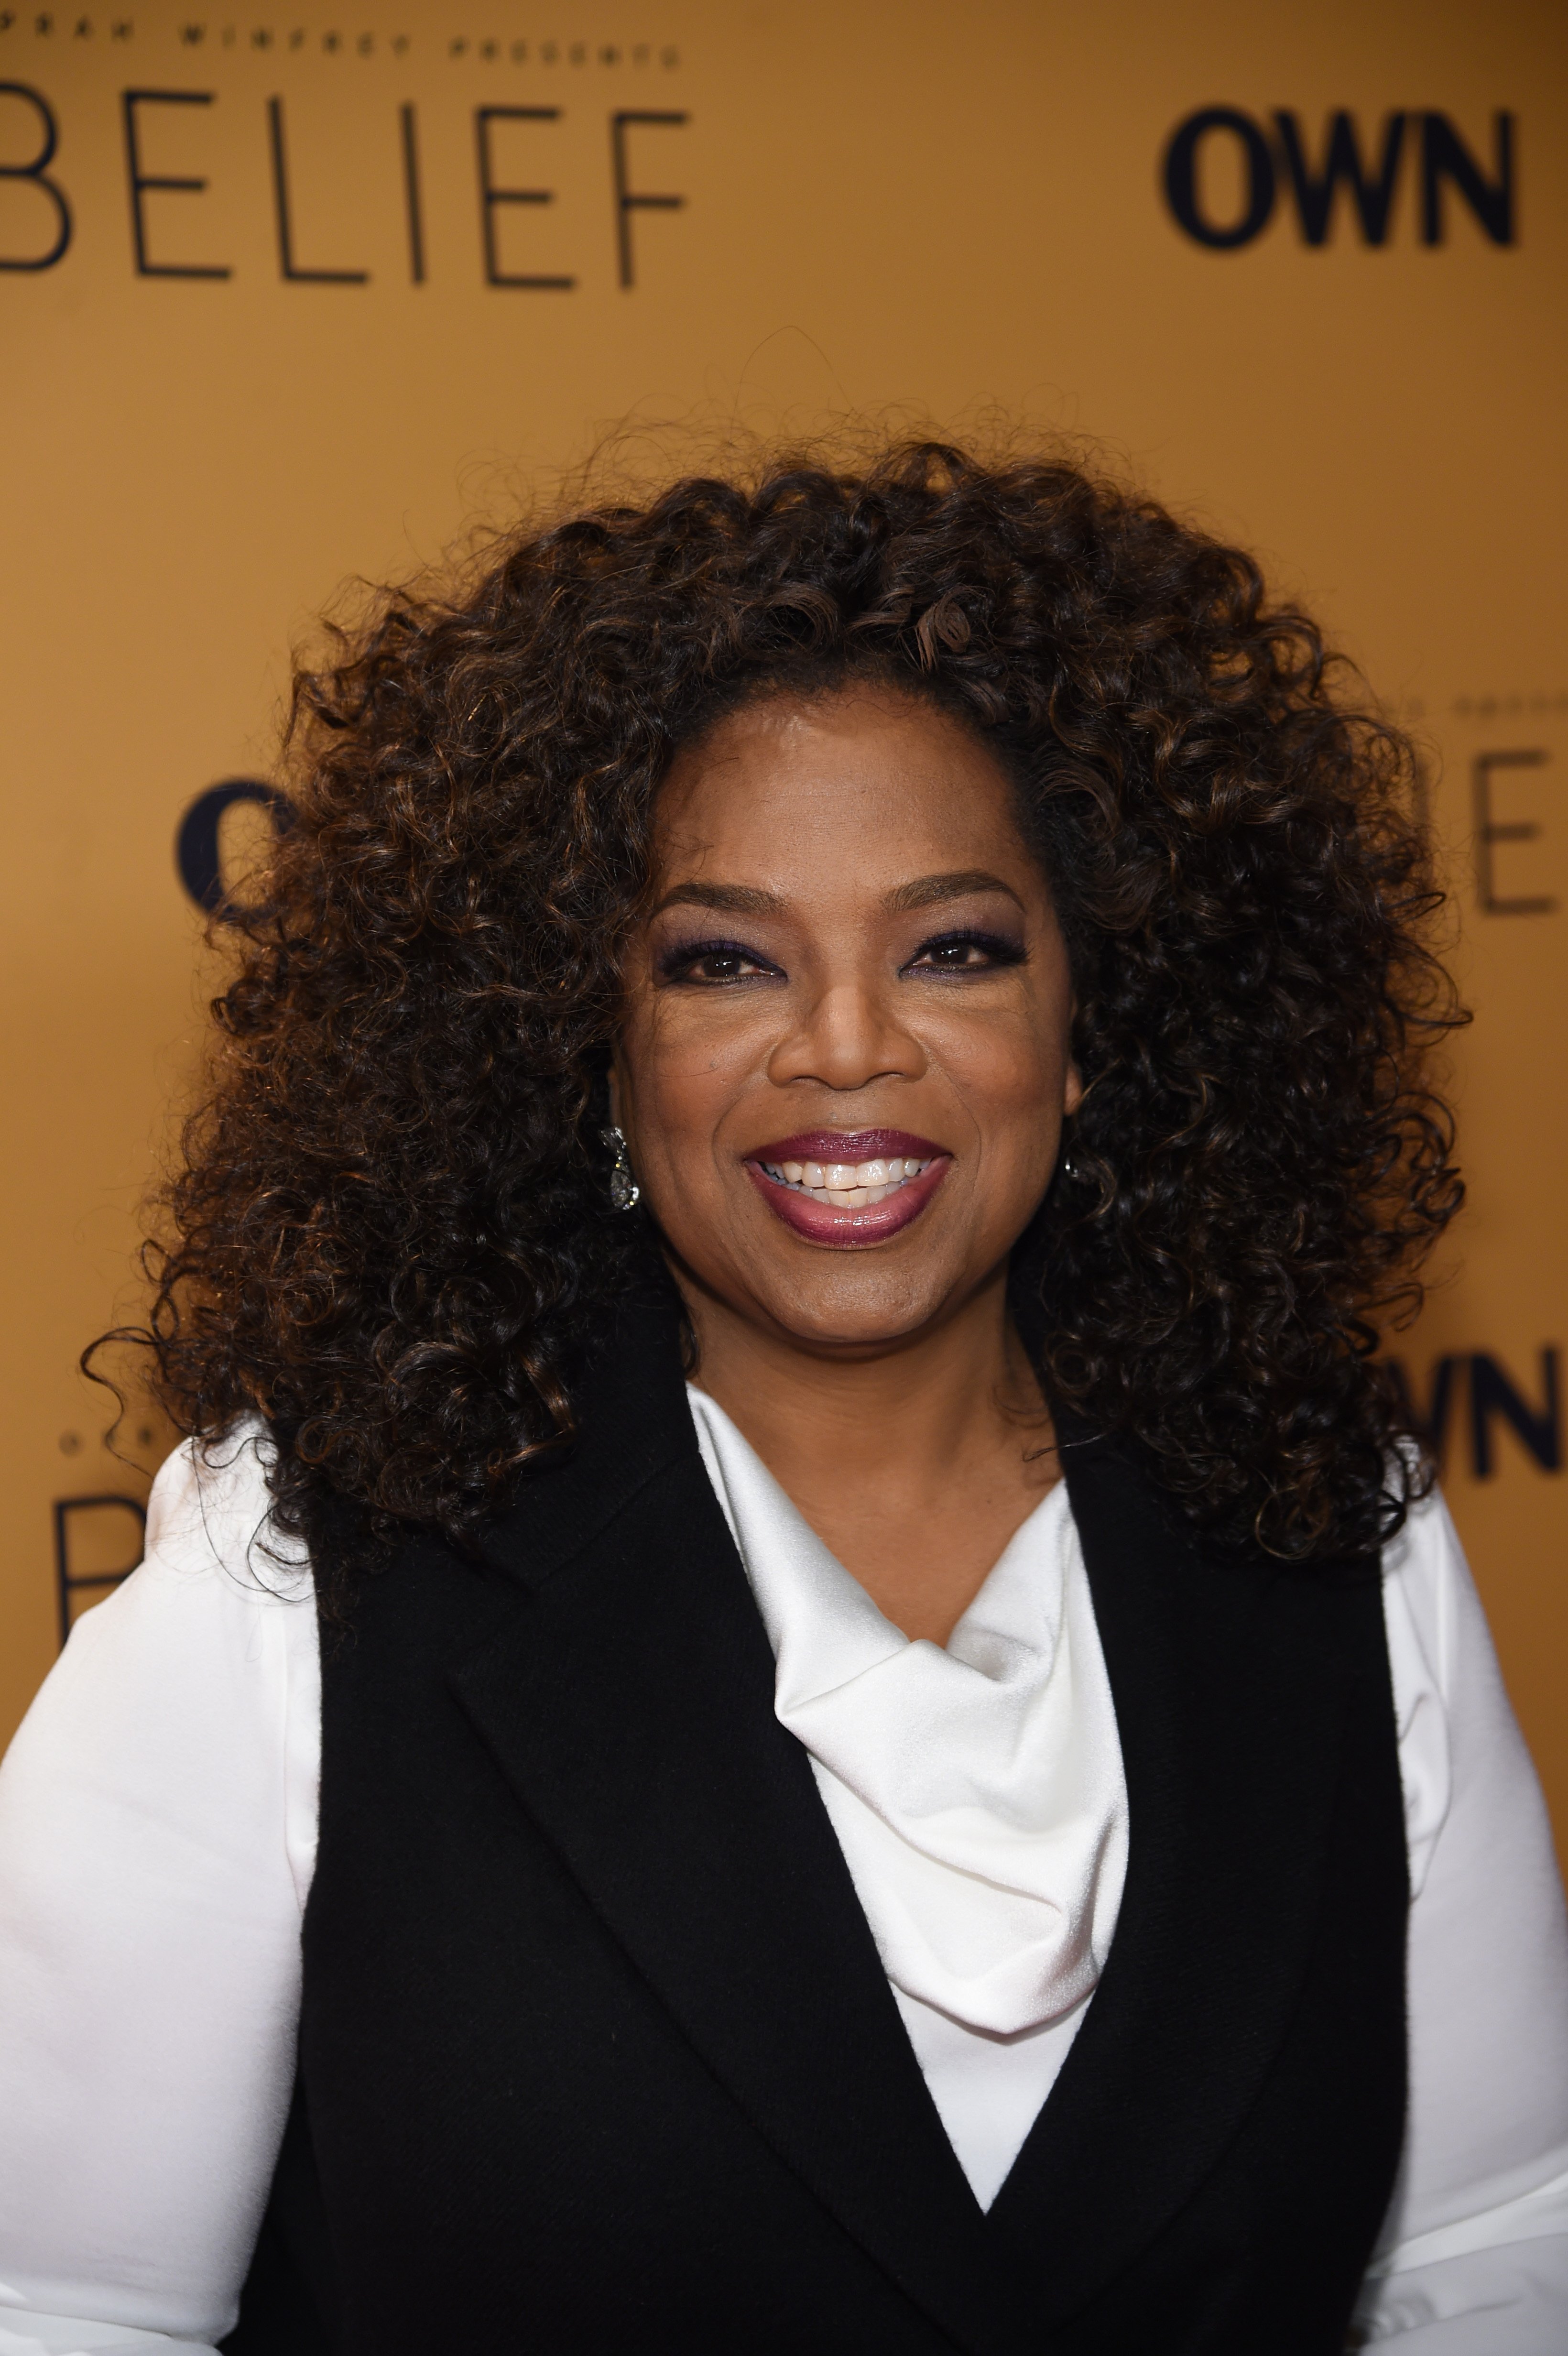 Oprah Winfrey at the "Belief" New York premiere on Oct. 14, 2015 in New York City | Photo: Getty Images